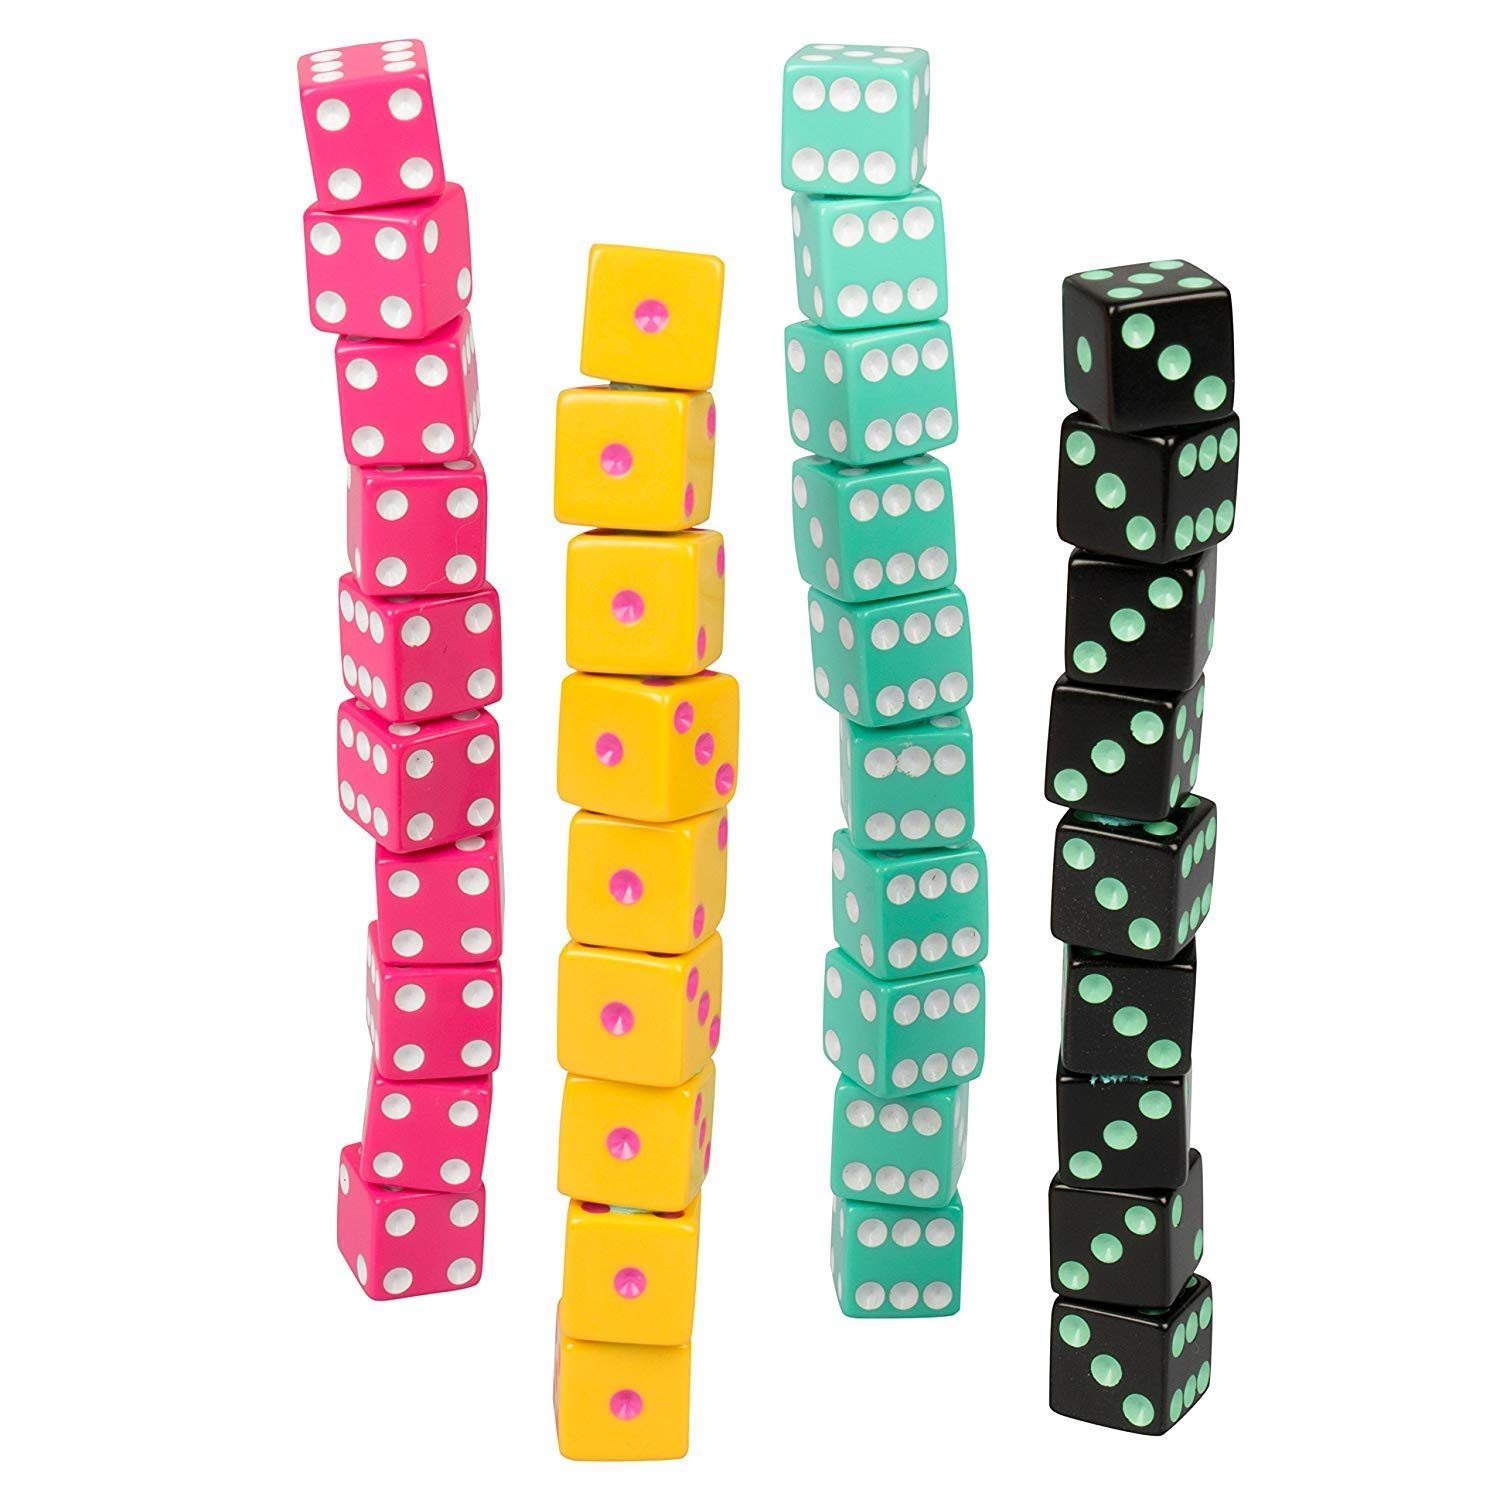 TENZI Dice Party Game - A Fun, Fast Frenzy for The Whole Family - 4 Sets of 10 Colored Dice with Storage Tube - Colors May Vary